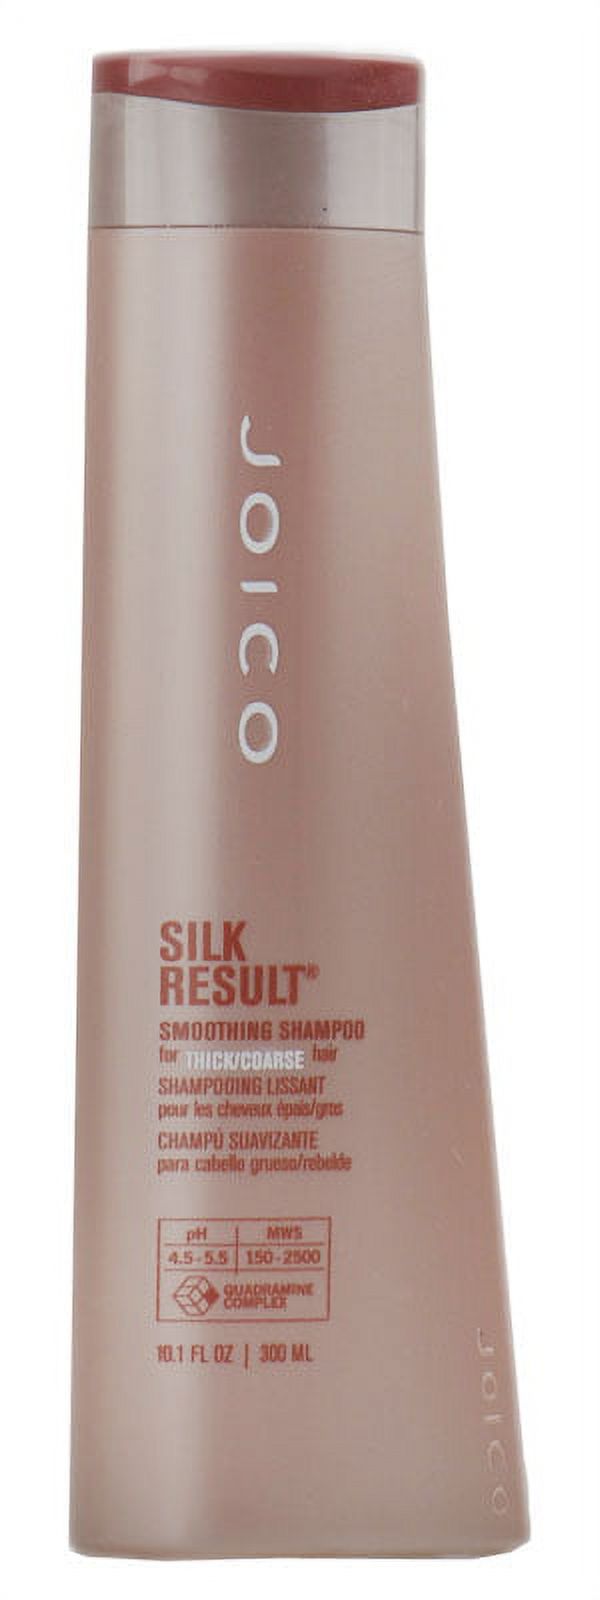 Joico Silk Result Smoothing Shampoo for Thick/Coarse Hair (Size : 10 oz - Thick/Coarse) - image 1 of 1